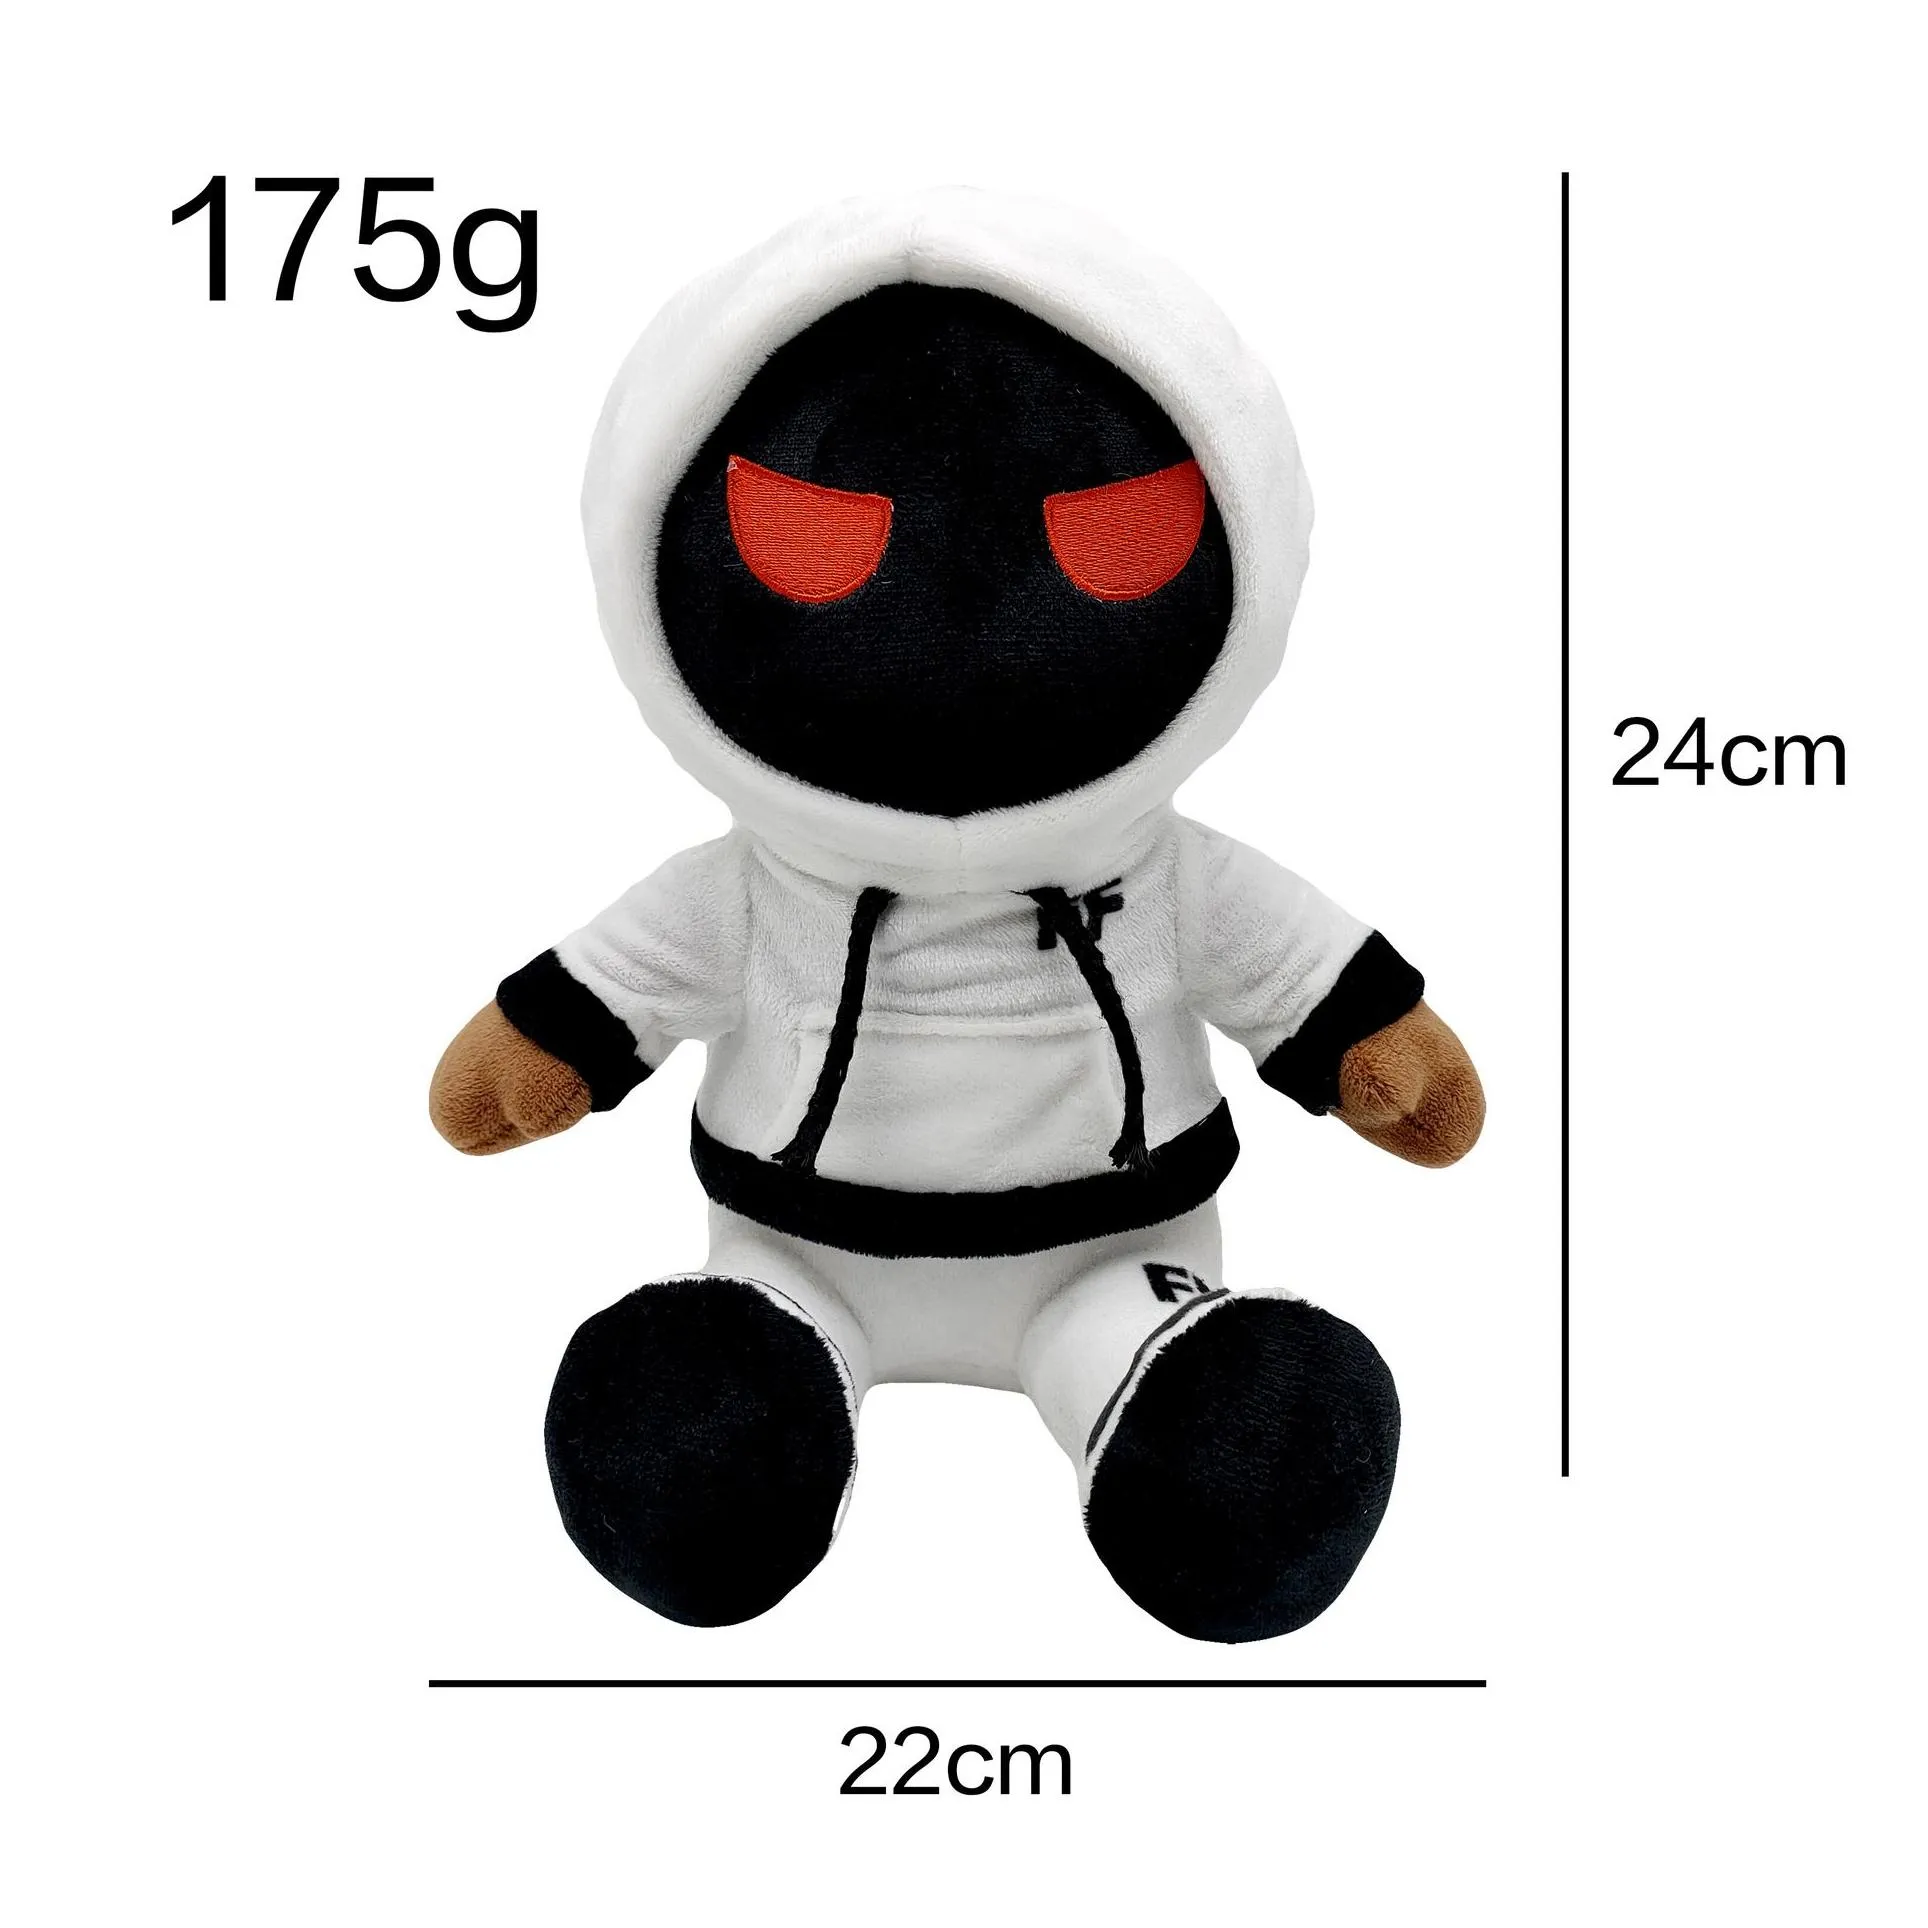 YORTOOB Foltyn Family Plush Toy Black-faced Mystery Man in a Hoodie Gift or Home Decorations